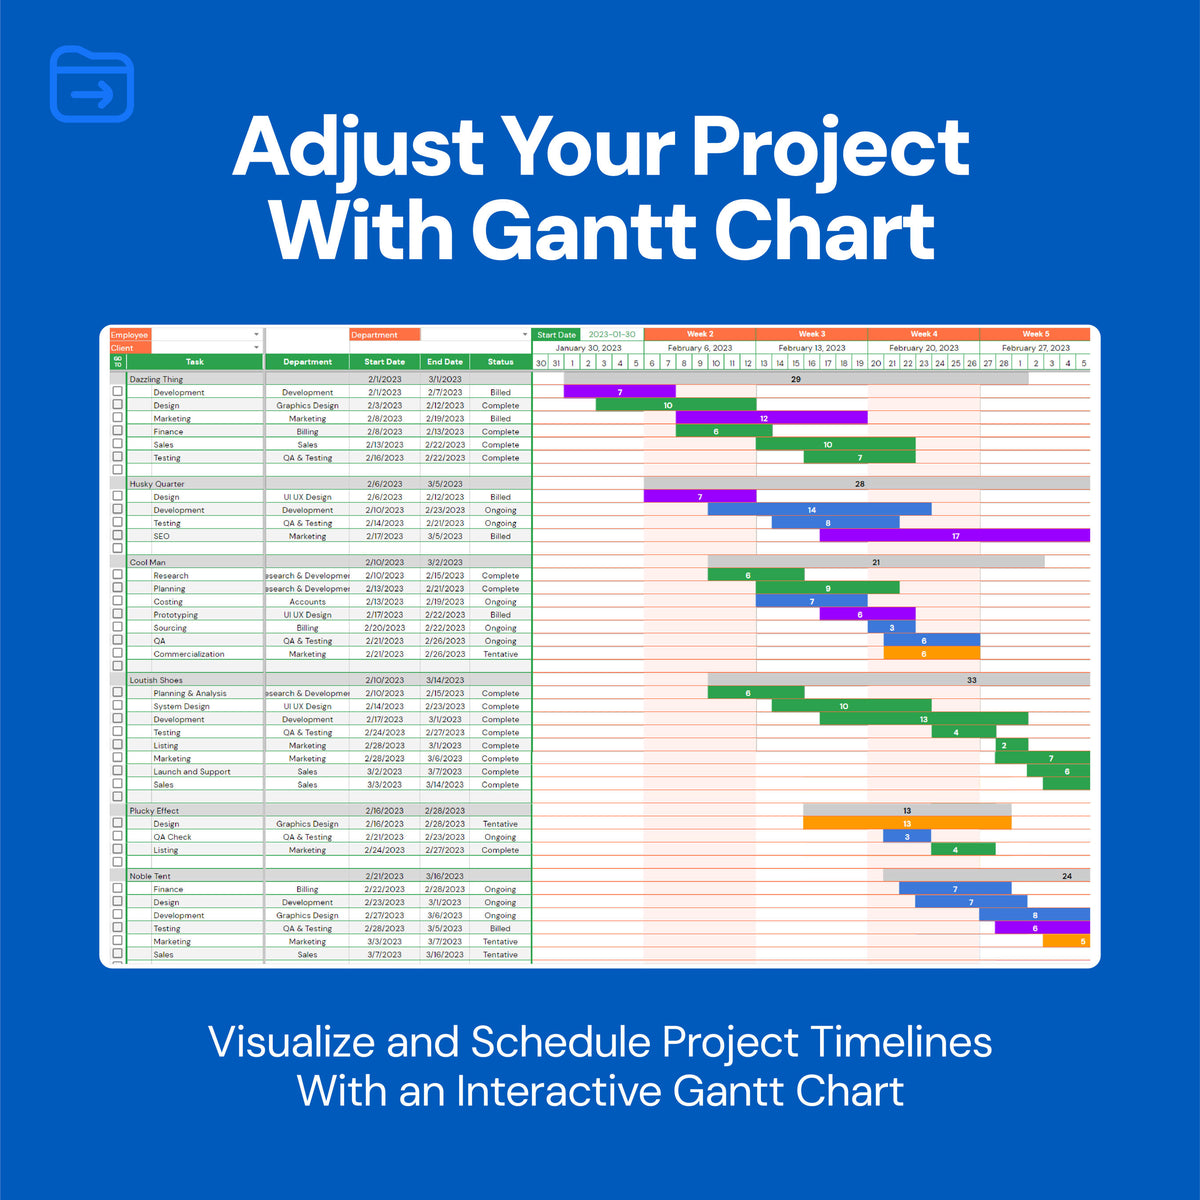 Project Management Tool